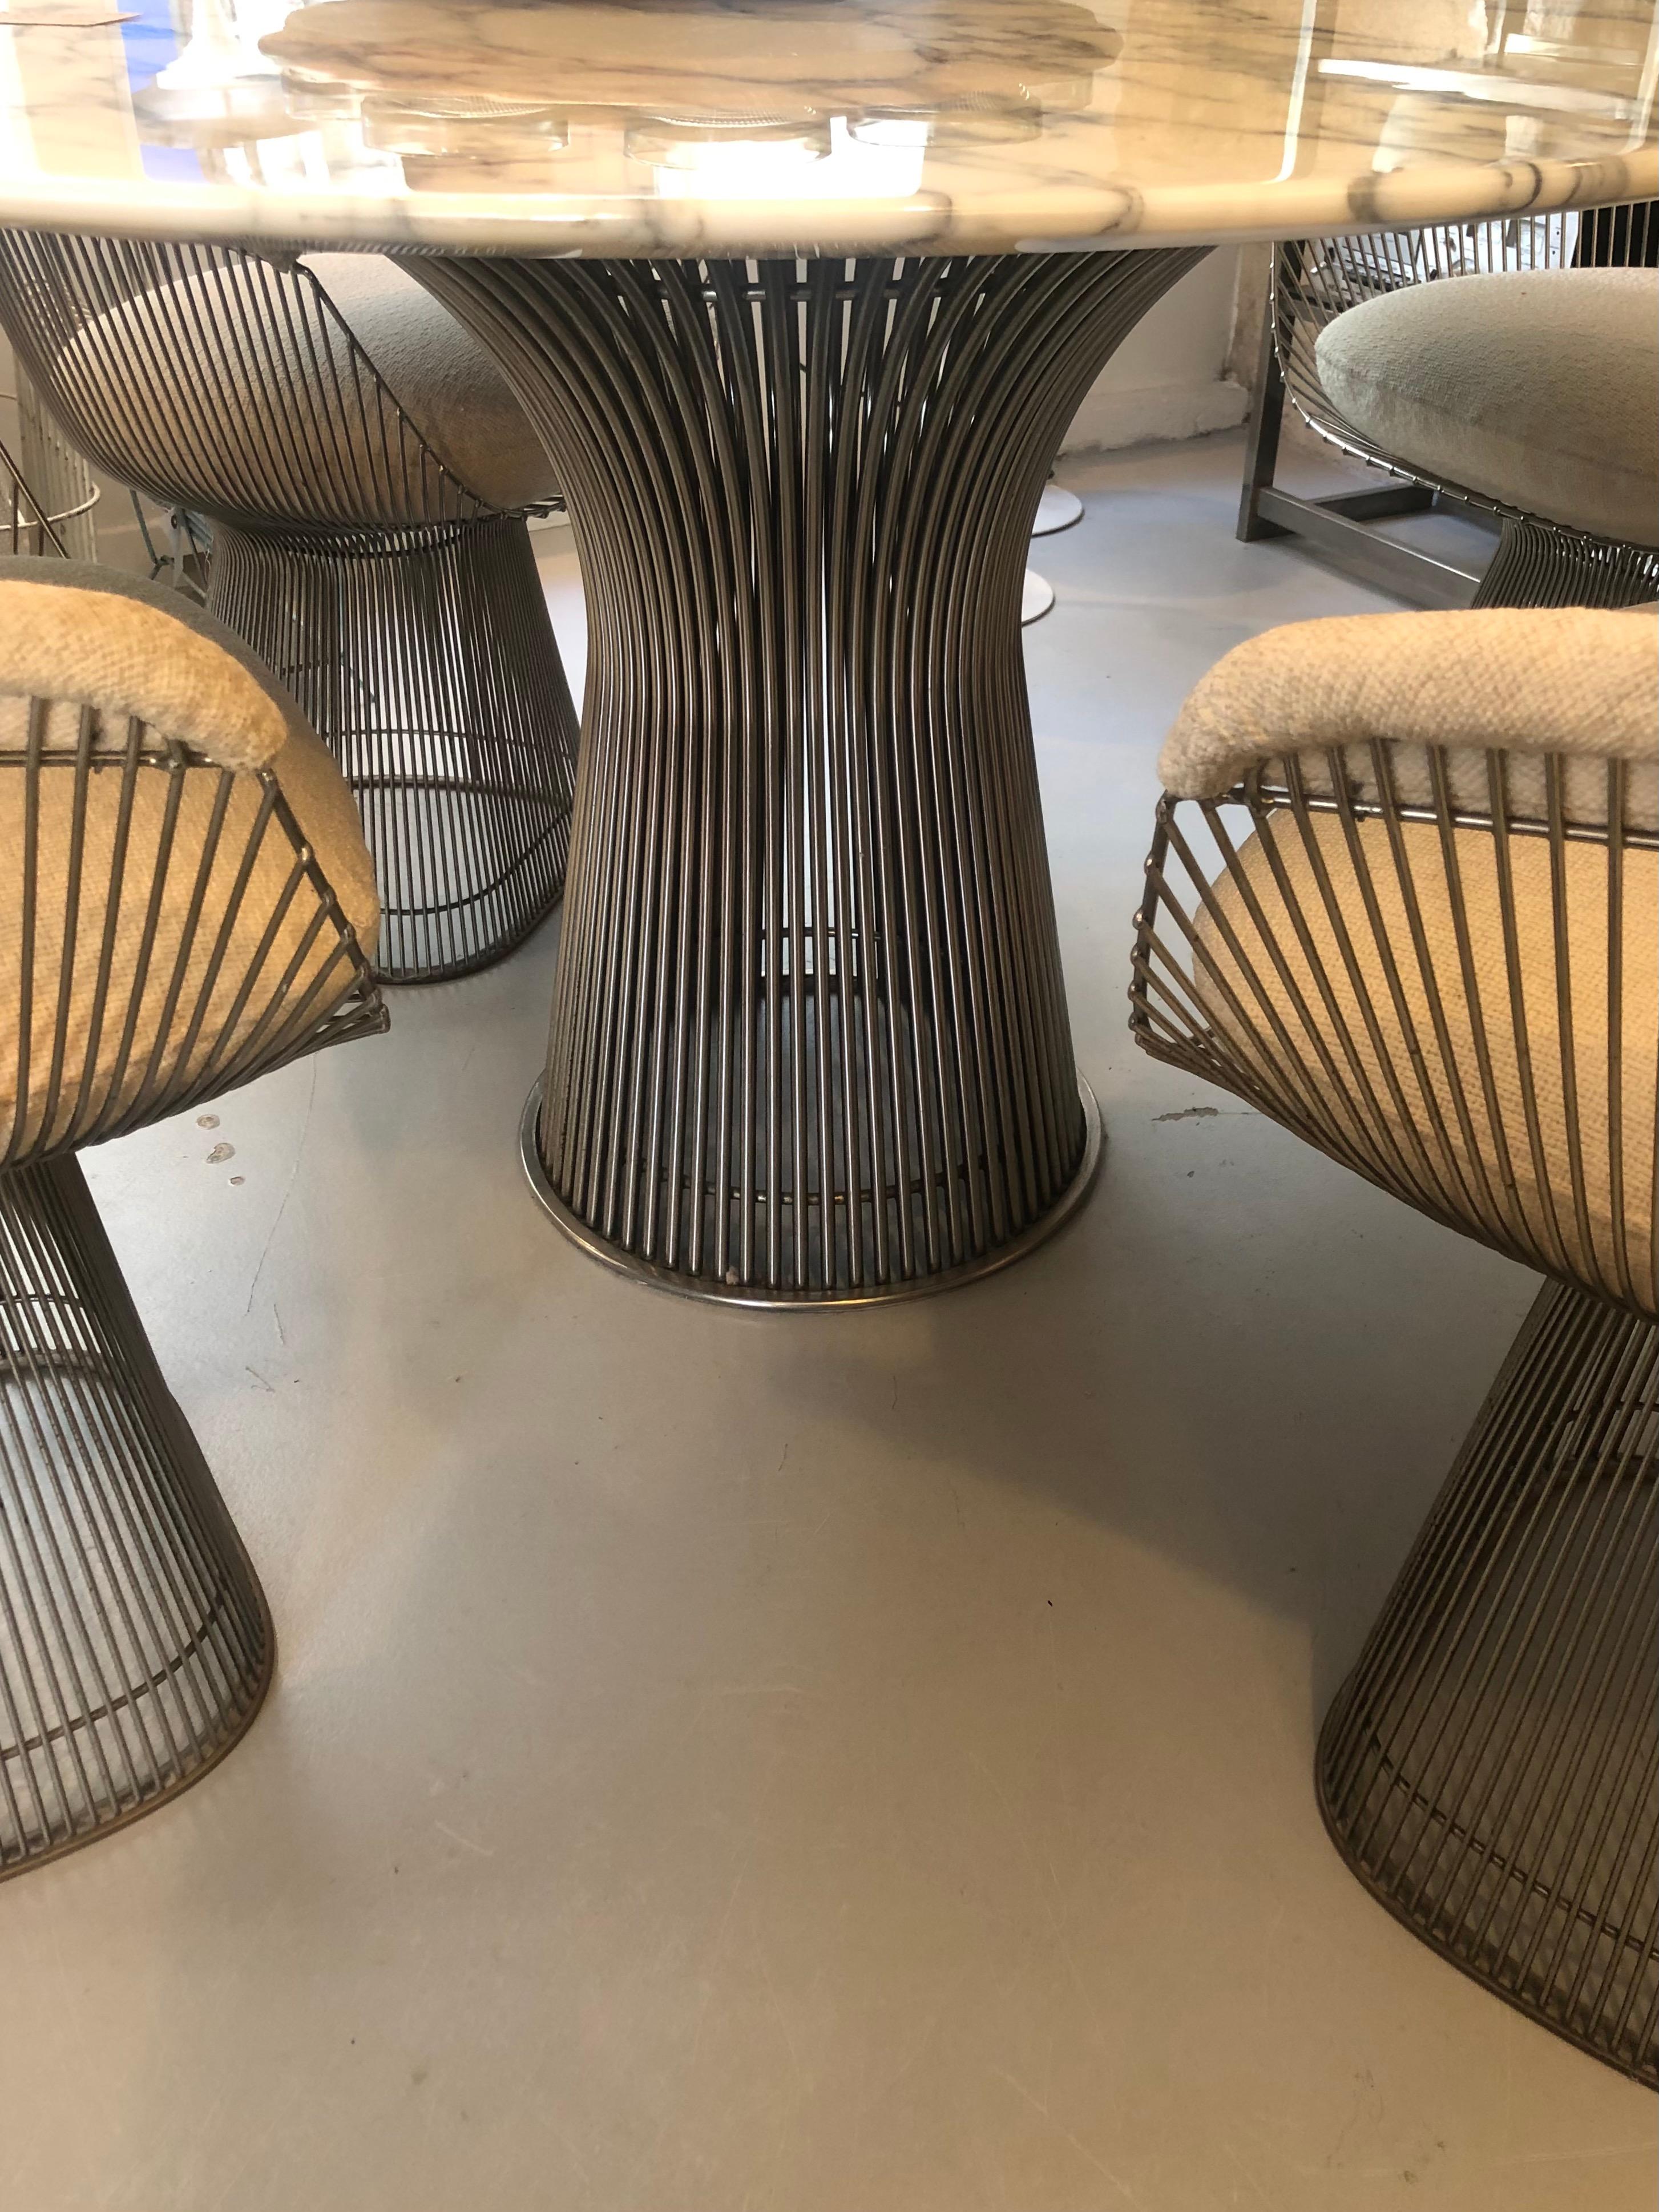 Mid-Century Modern Warren Platner Marble and Chrome Dining Table and Chairs, Ed. Knoll in 1966 For Sale